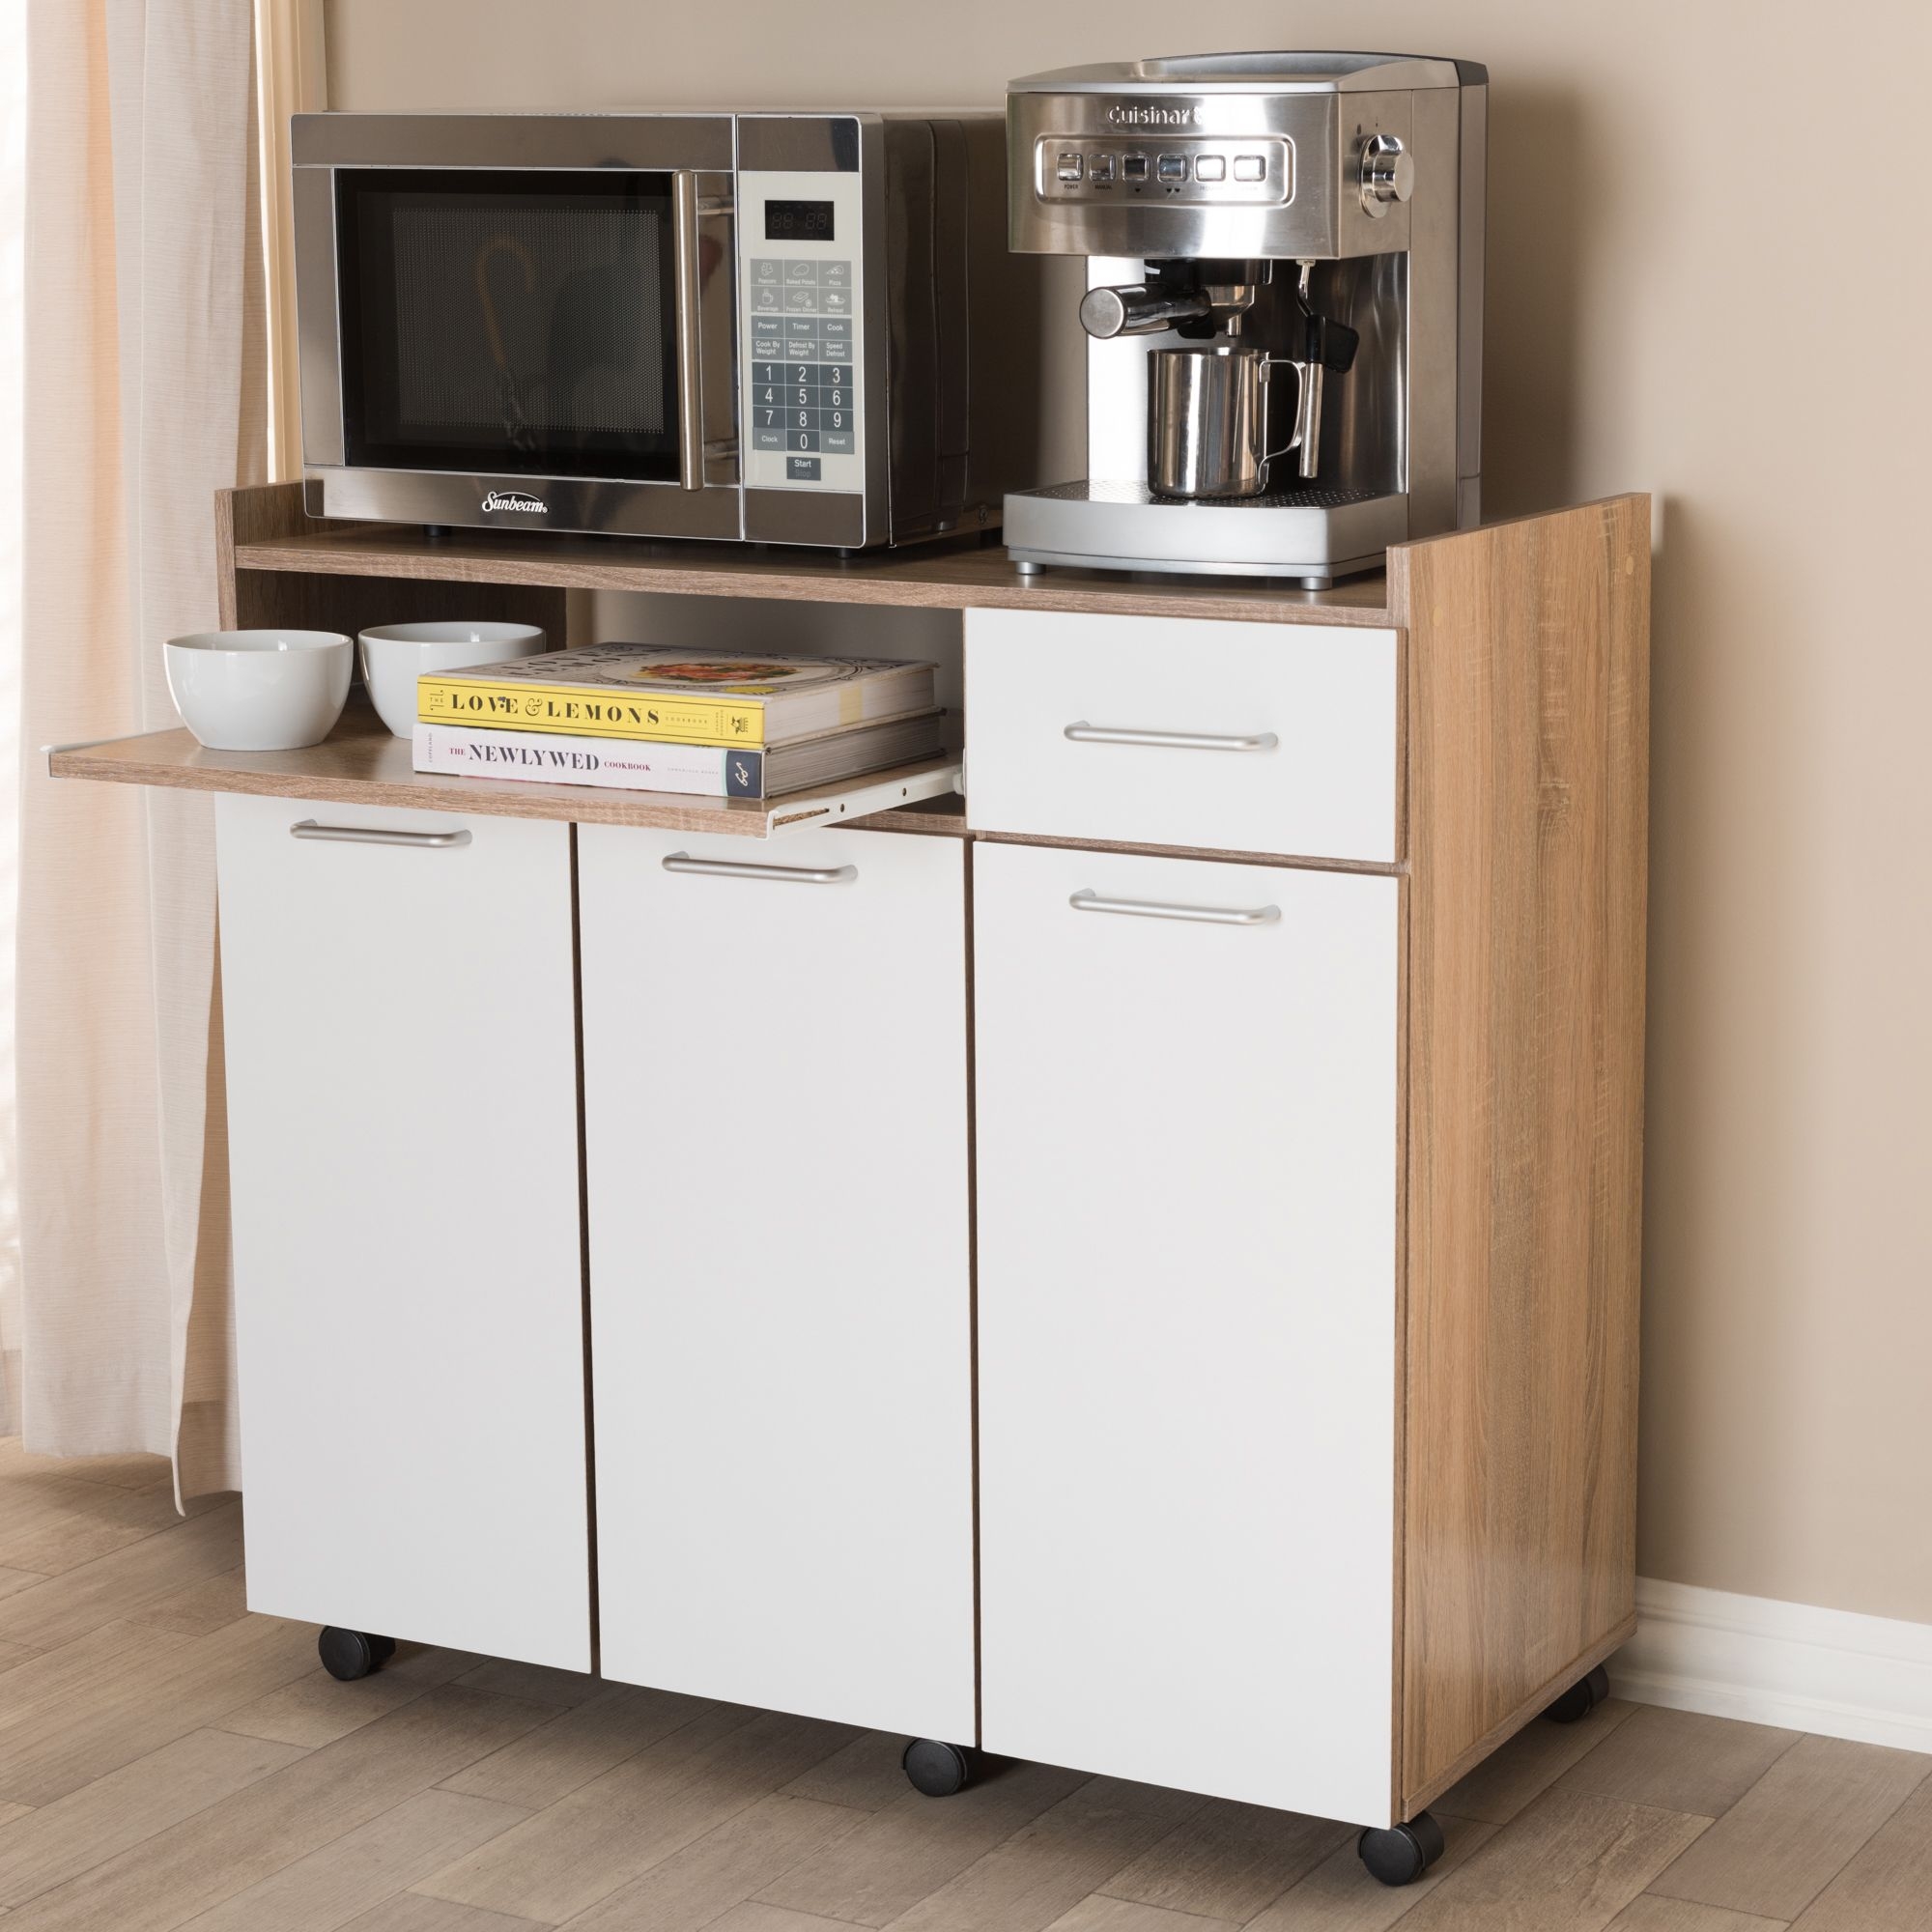 Free Standing Kitchen Cabinets Visualhunt, Small Cabinet For Pantry